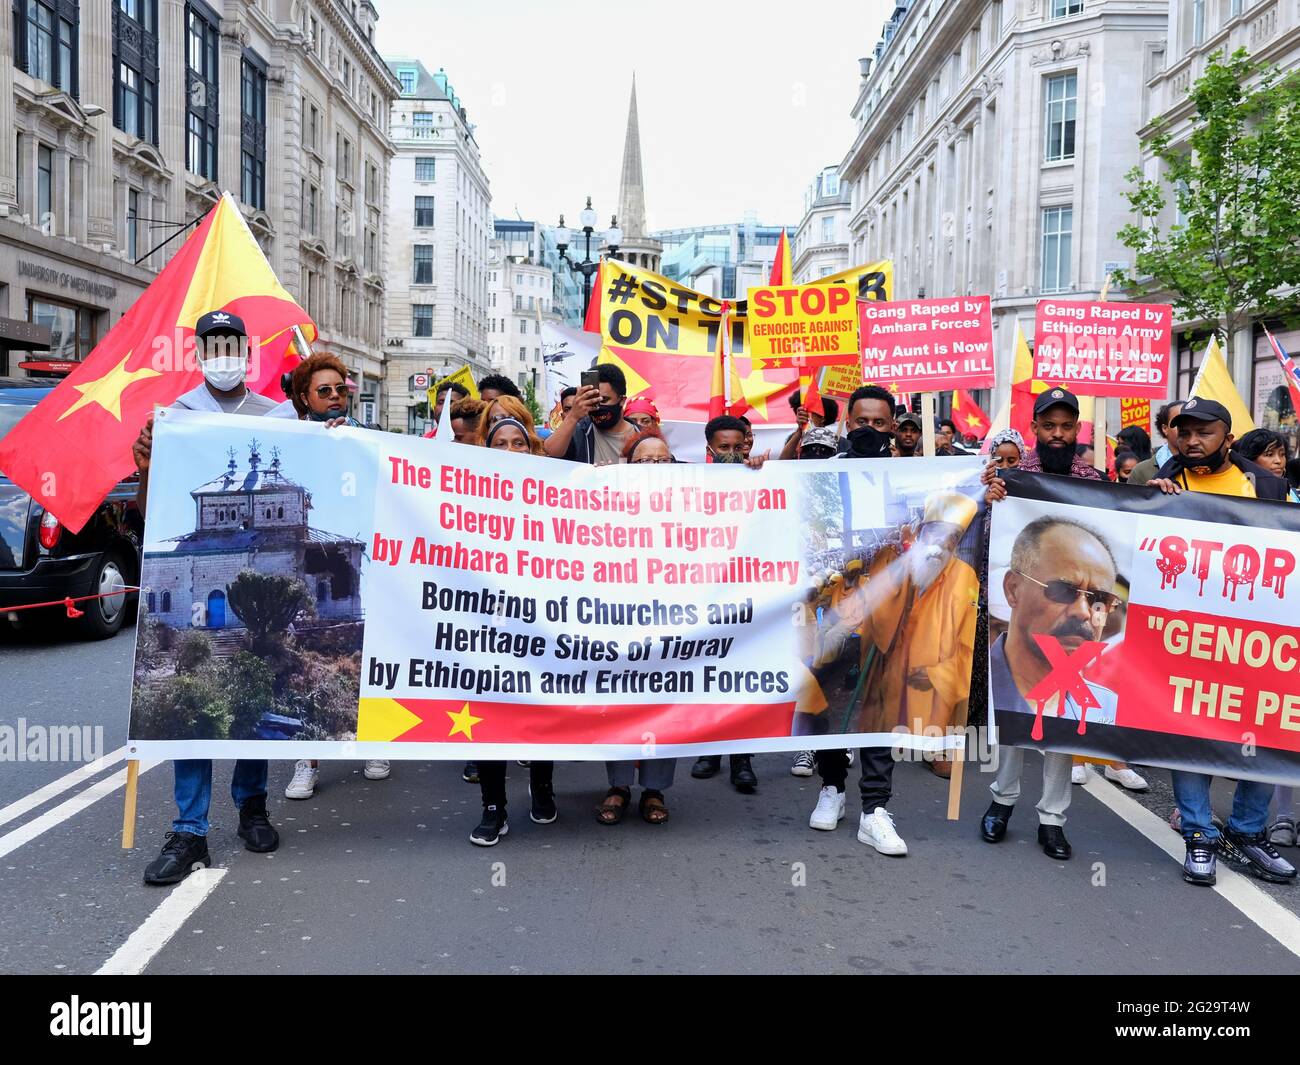 London, UK The Tigrayan community march in protest of human rights abuses and war crimes committed in the Ethiopian region by state forces. Stock Photo